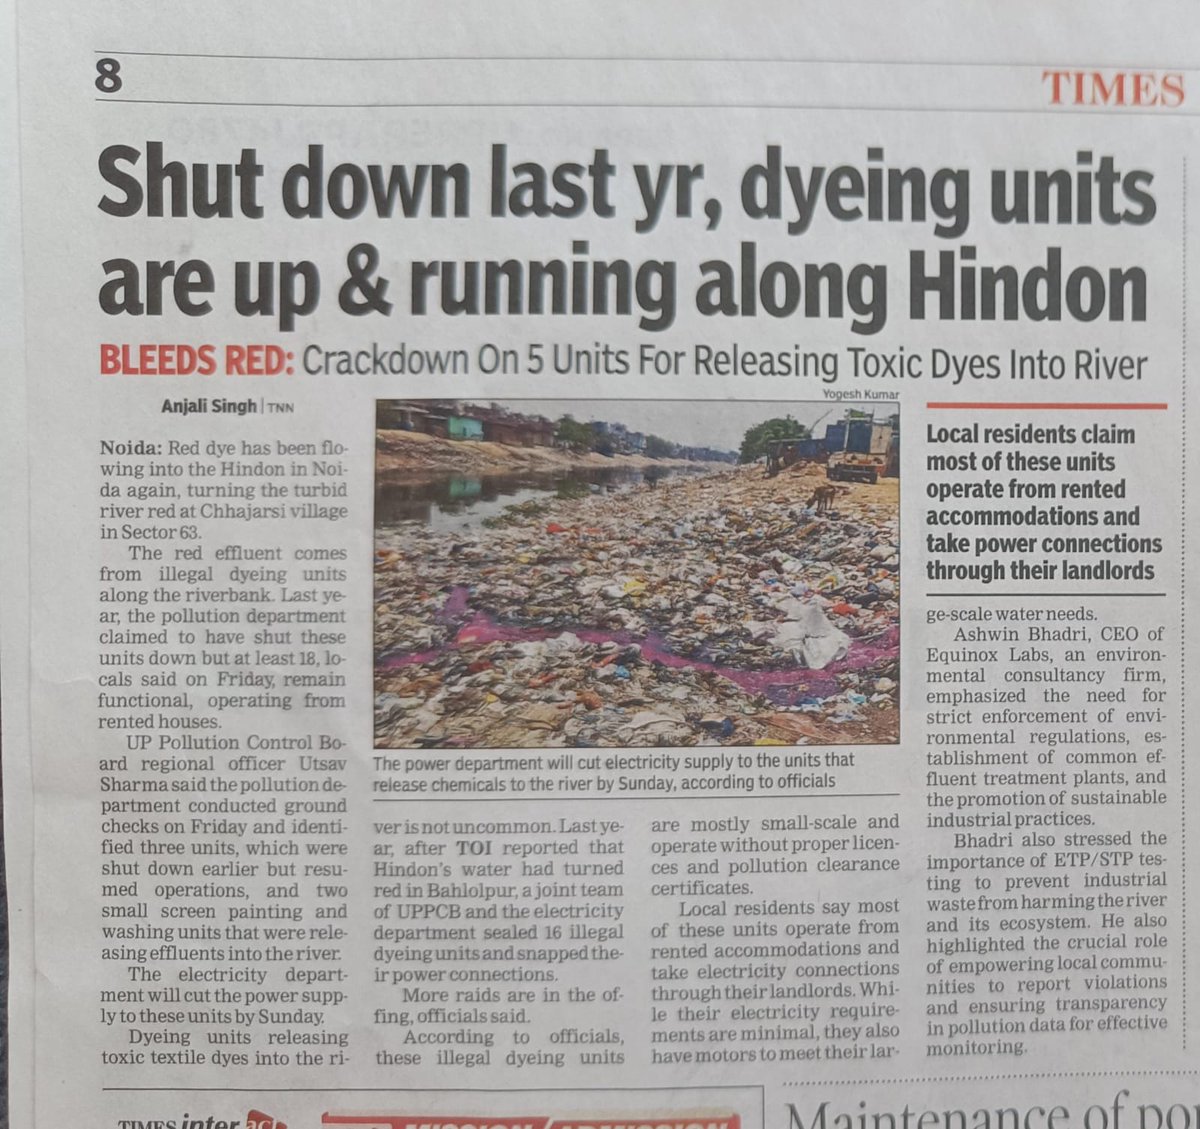 Red dye has been flowing into the Hindon in Noida again, turning the turbid river red at Chhajarsi village in Sector 63.
timesofindia.indiatimes.com/city/noida/ill…